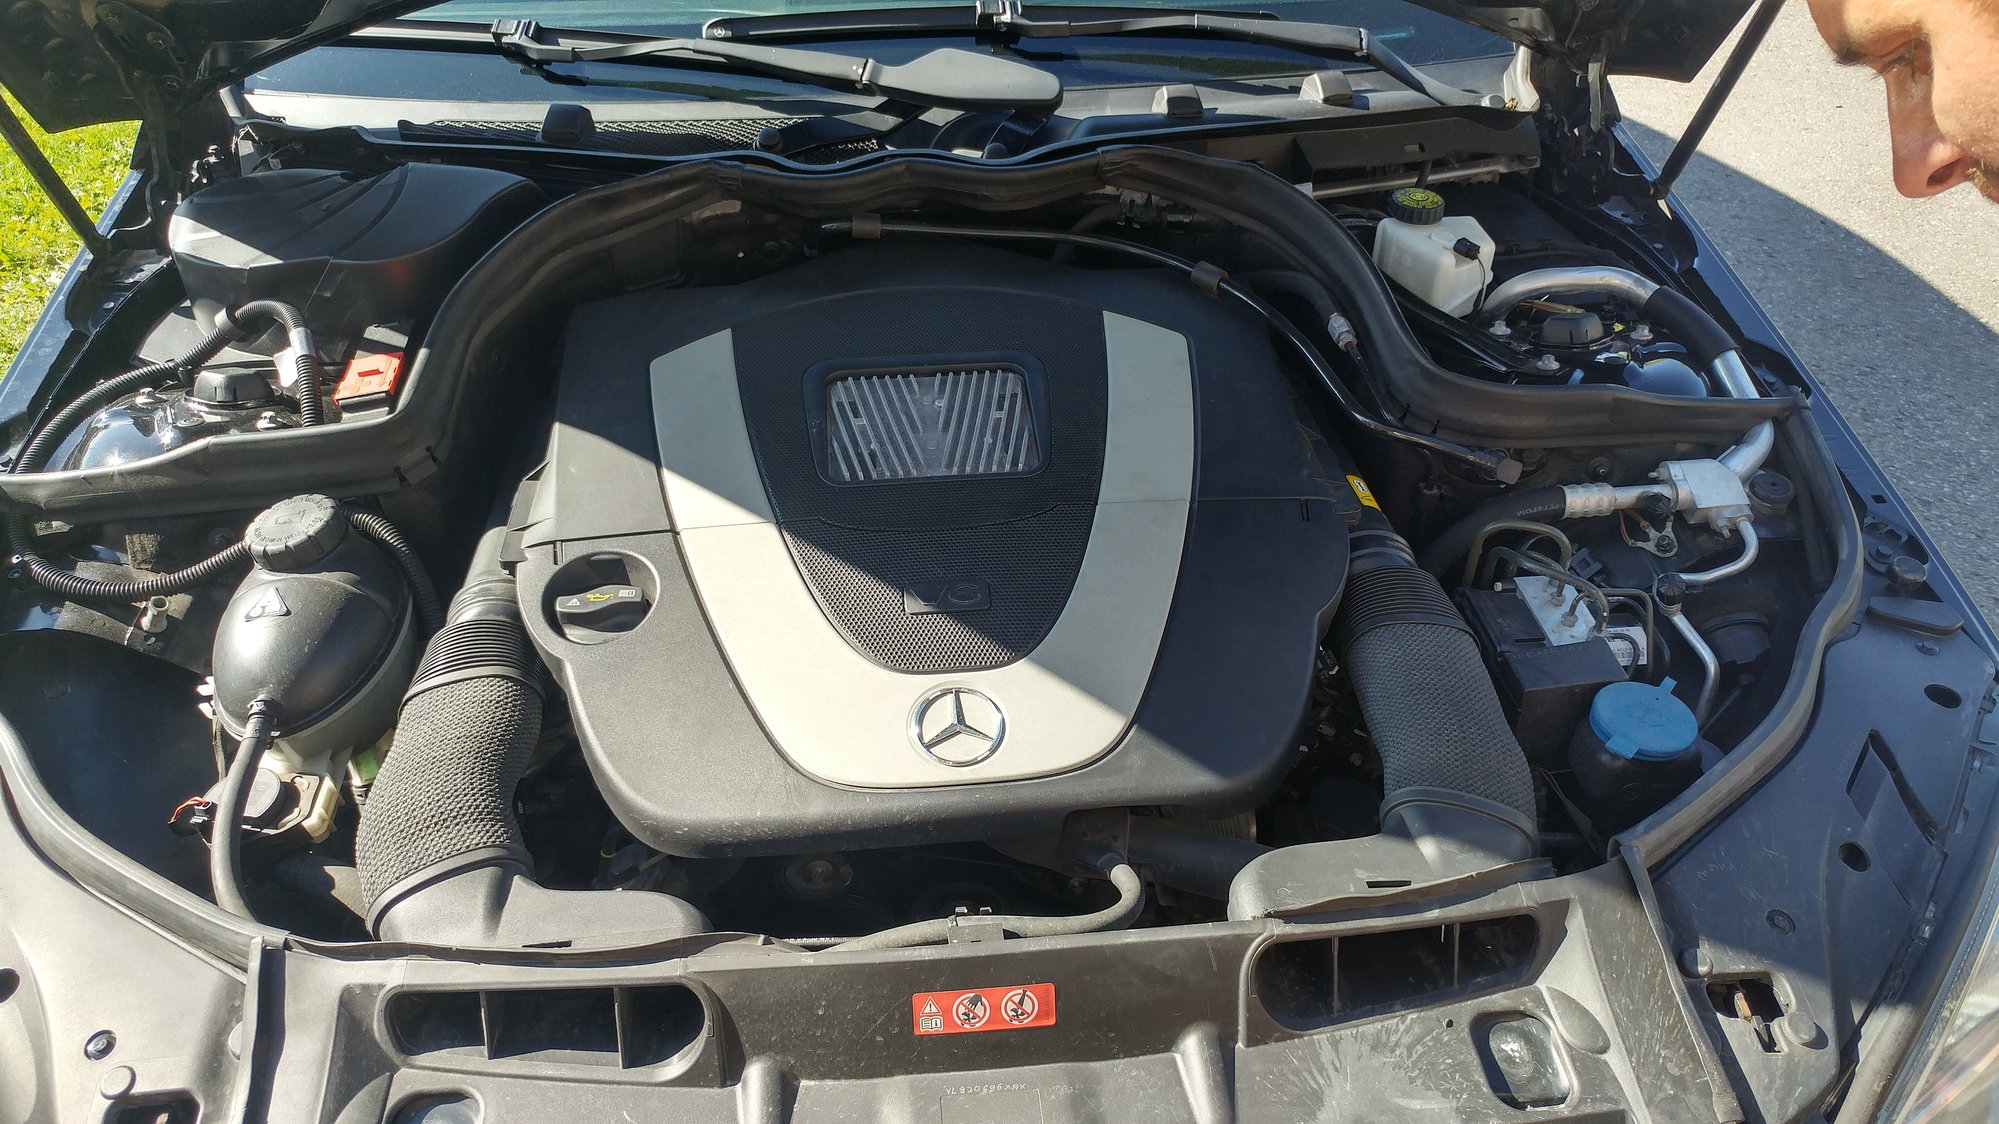 Velocity Concepts Short Ram Air Intake Kit C350 3.5 Filter Combo Black Compatible with 08-12 Mercedes Benz C300 3.0